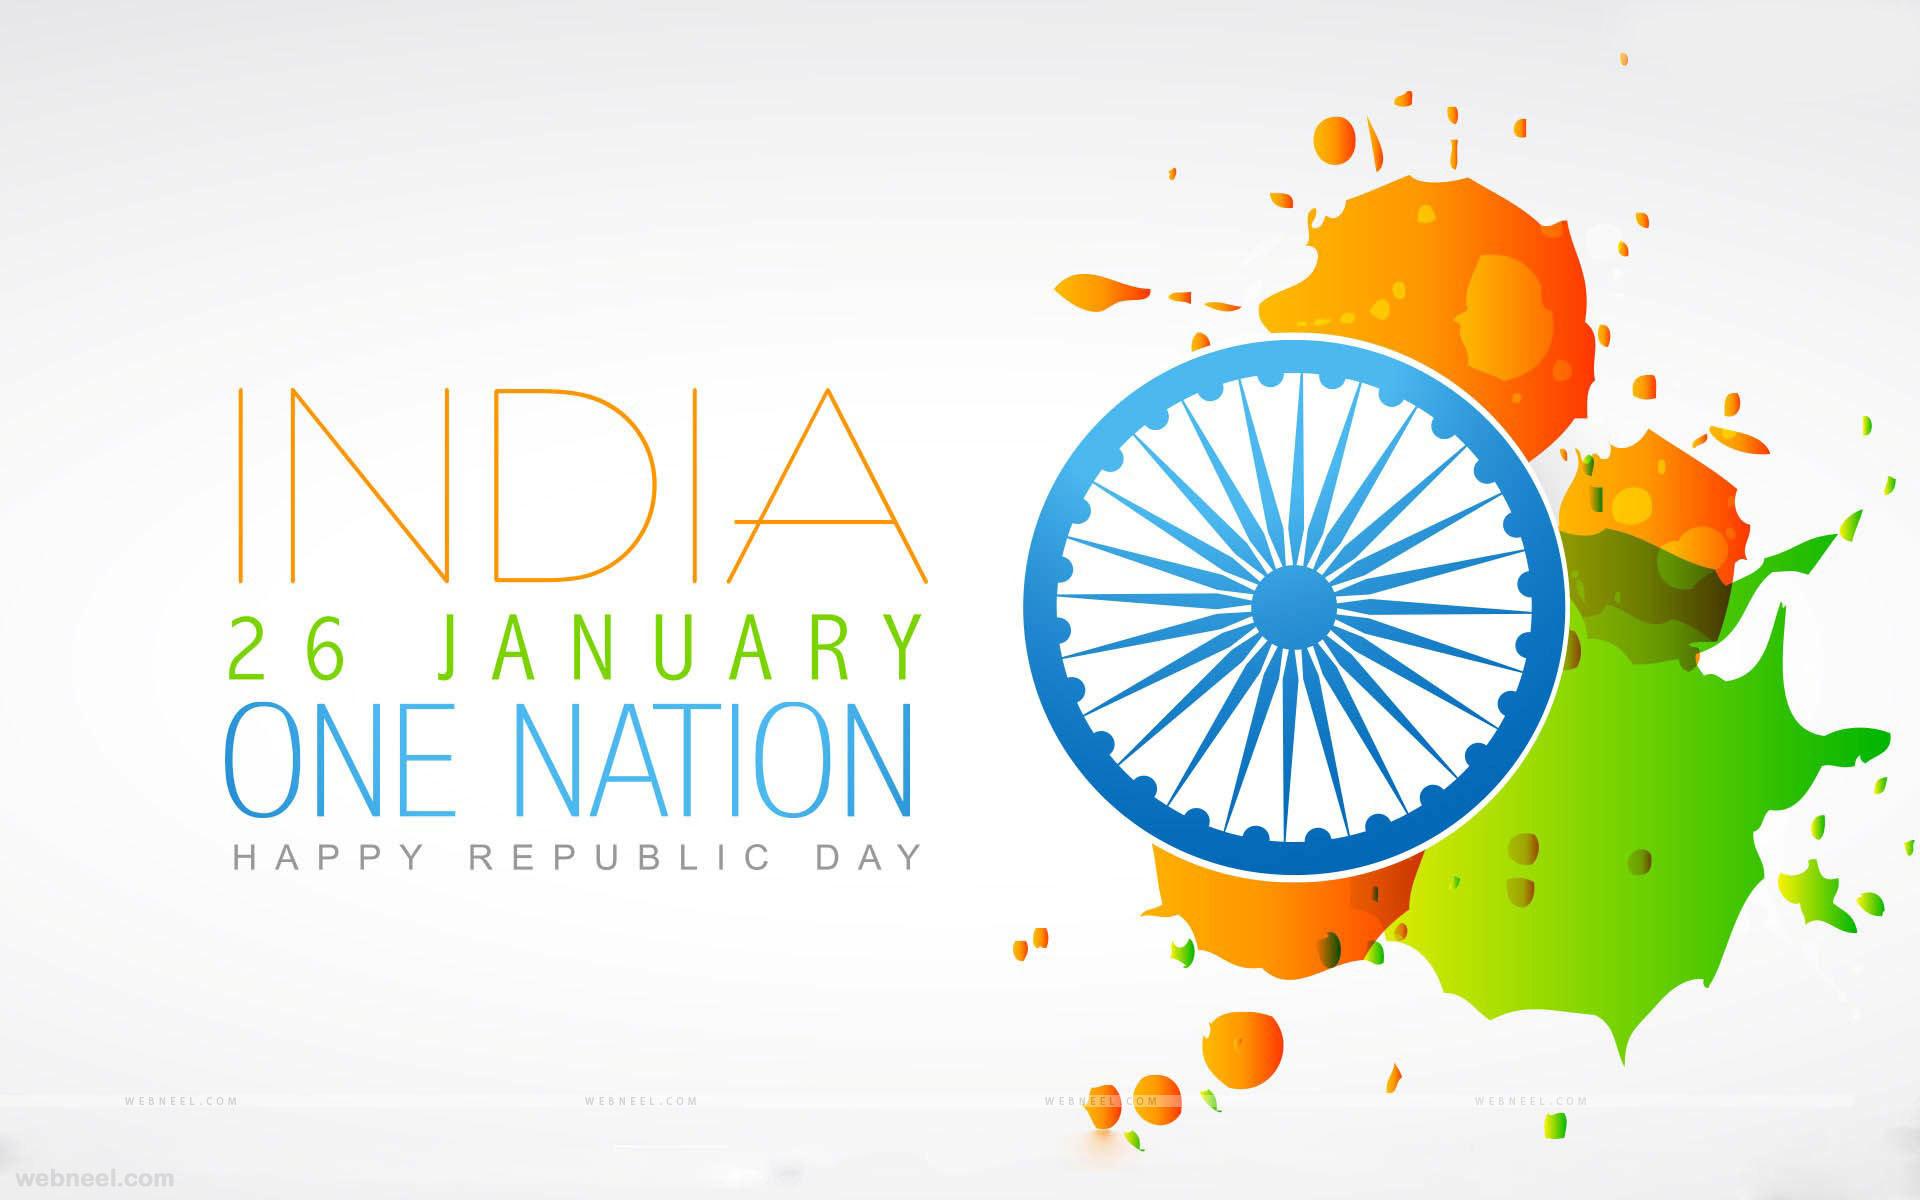 Beautiful Happy Republic Day Wishes and Wallpaper